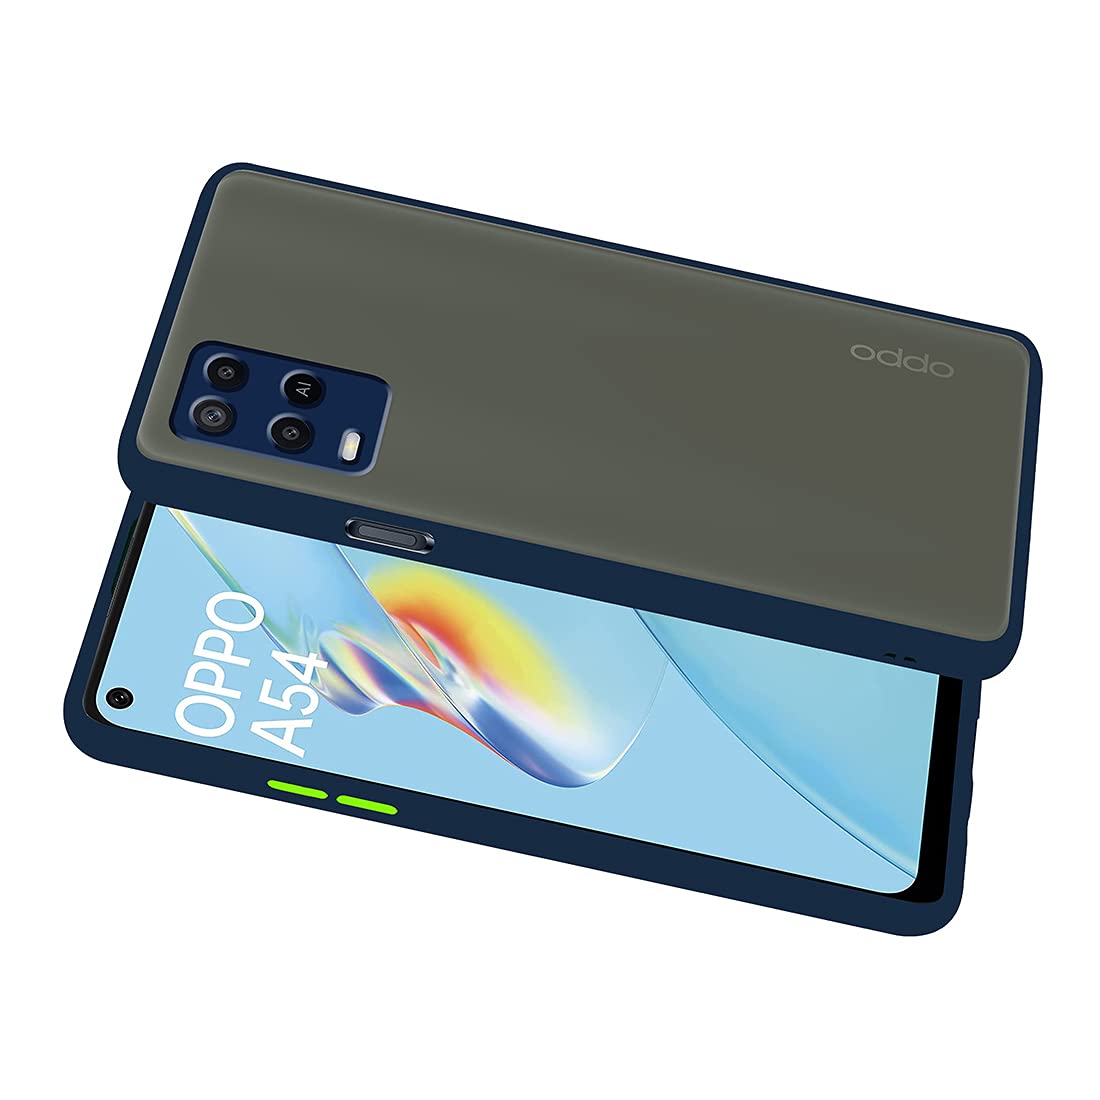 Smoke Back Case Cover for Oppo A54 4G